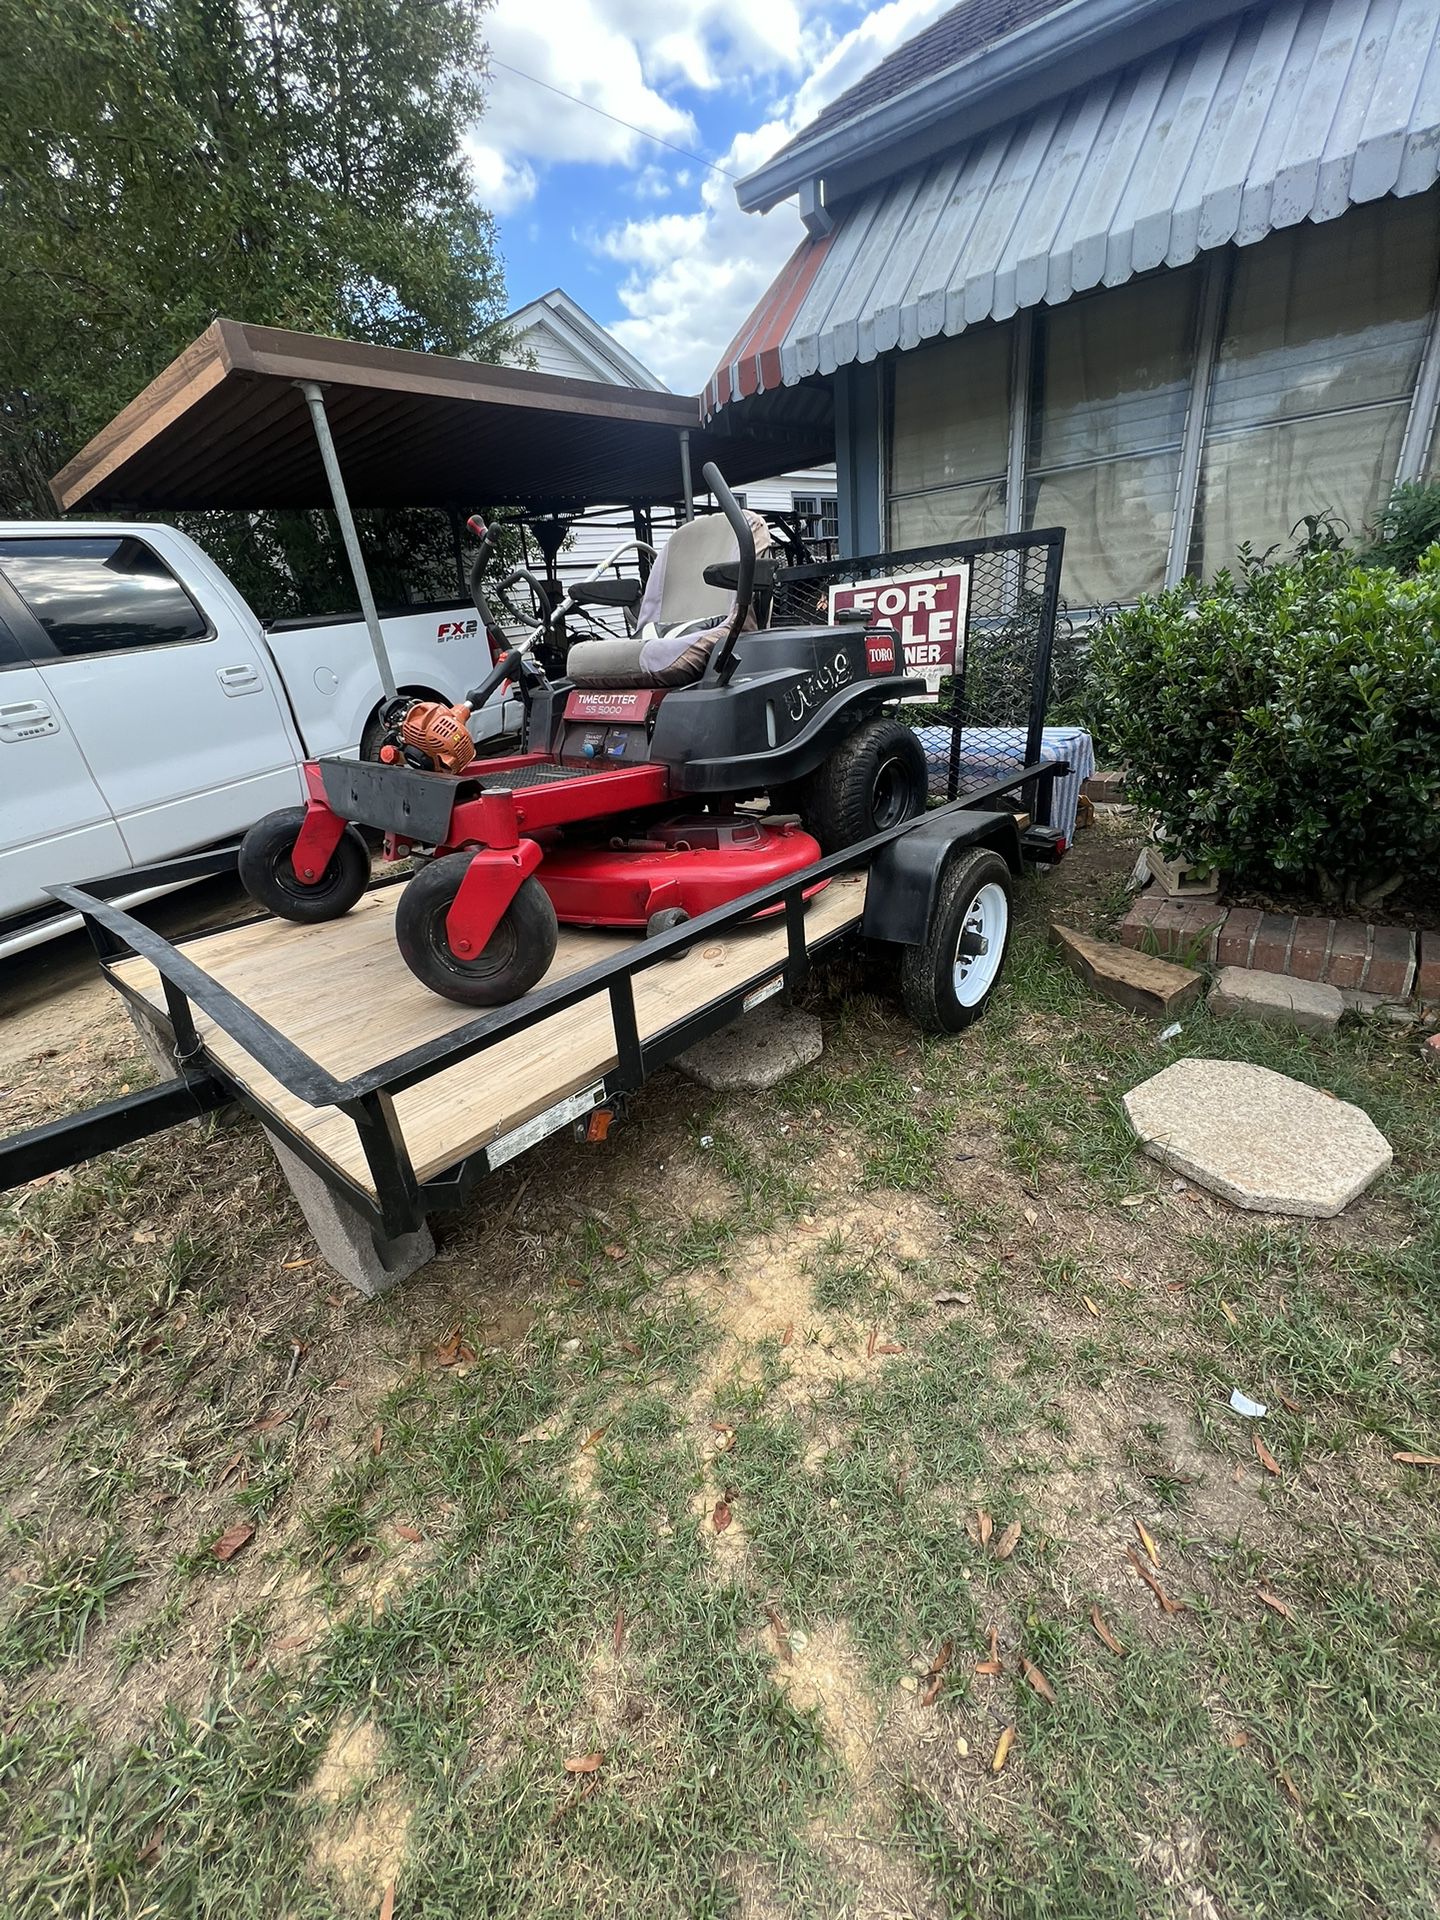 Lawn Care Starter Bundle: Trailer, Zero Turn Mower, and Weedeater